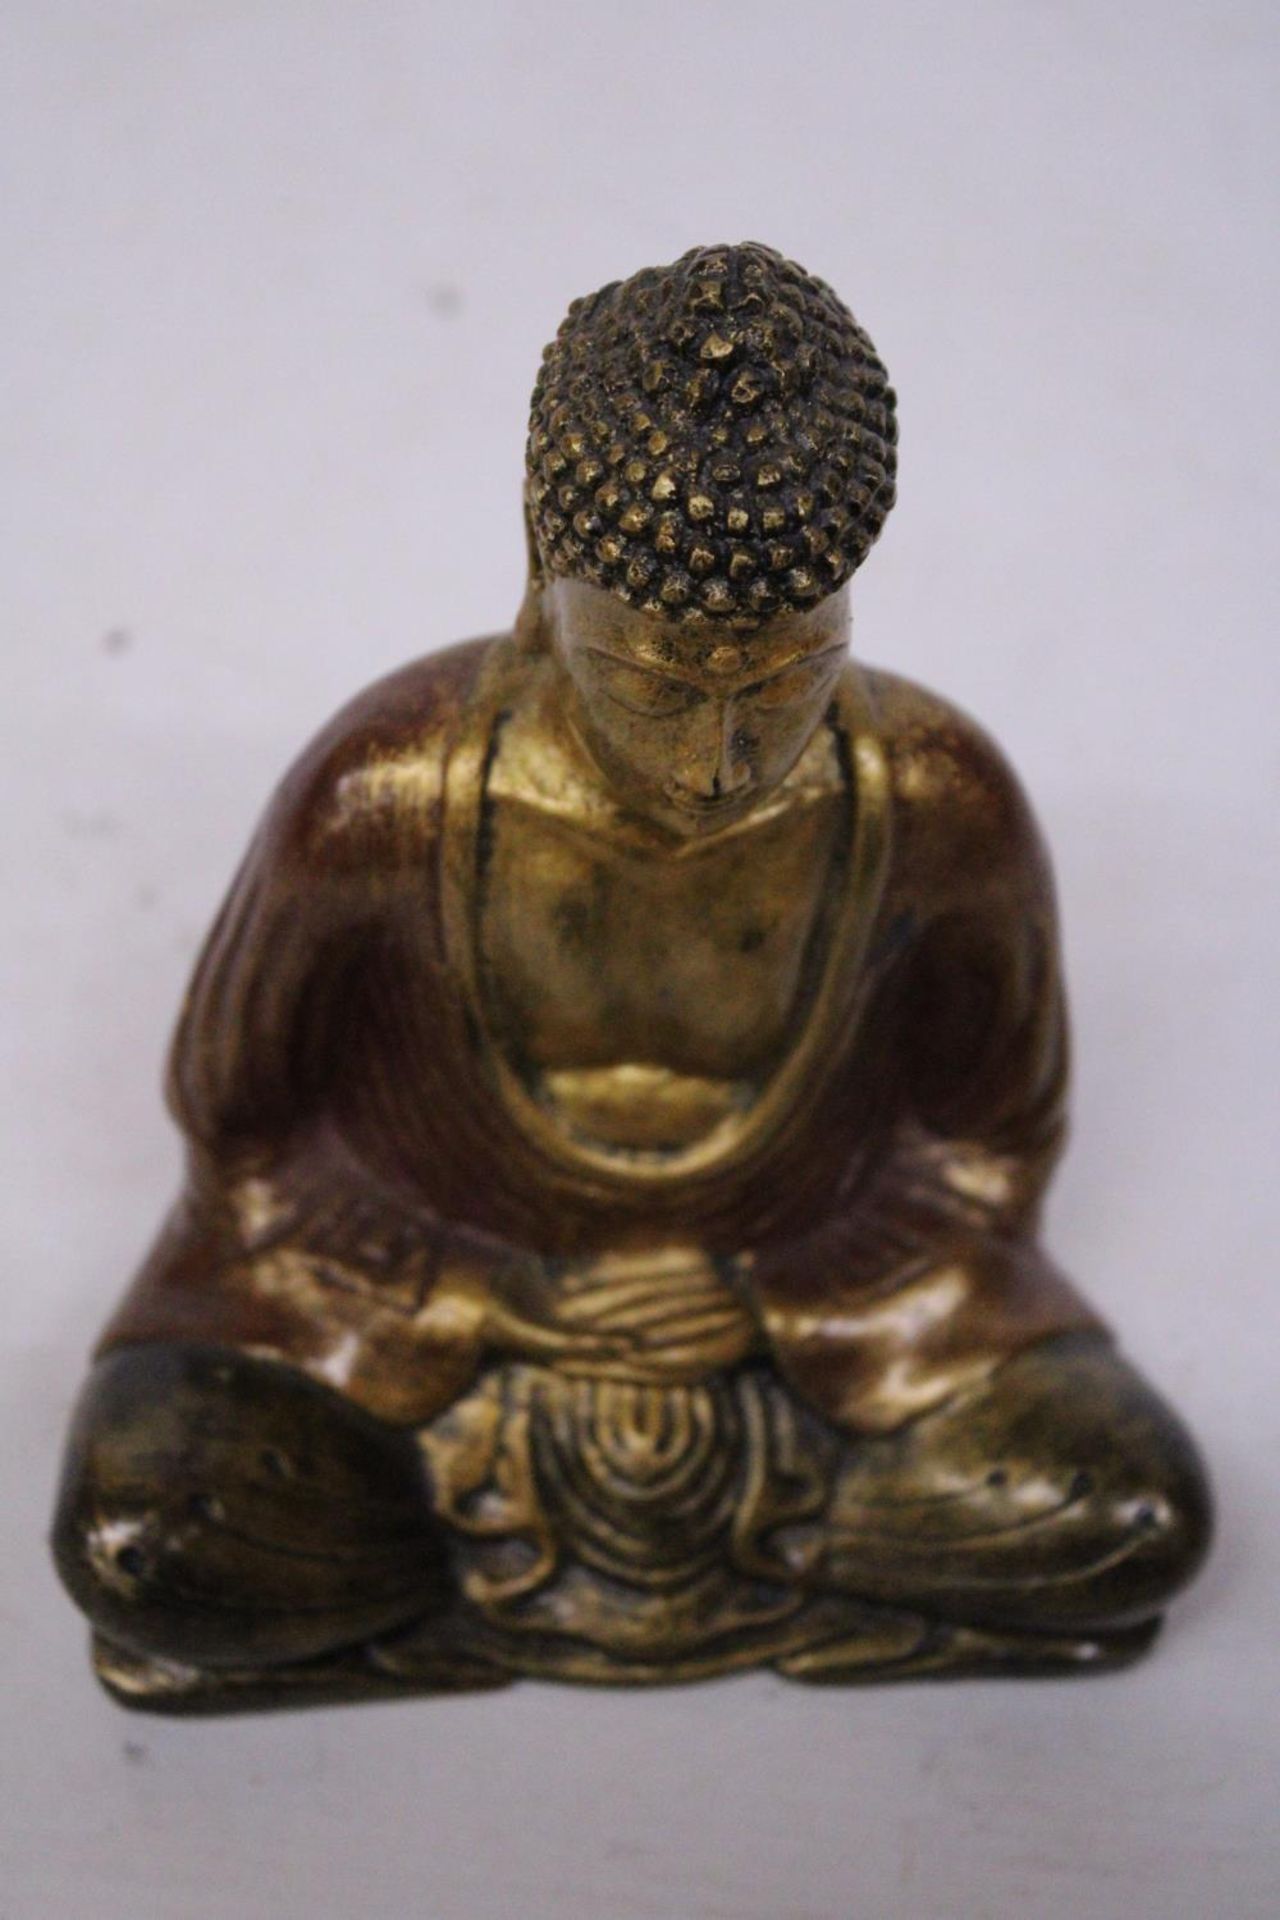 A SMALL RESIN GOLD COLOURED BUDDHA STATUE (16 CM) - Image 4 of 5